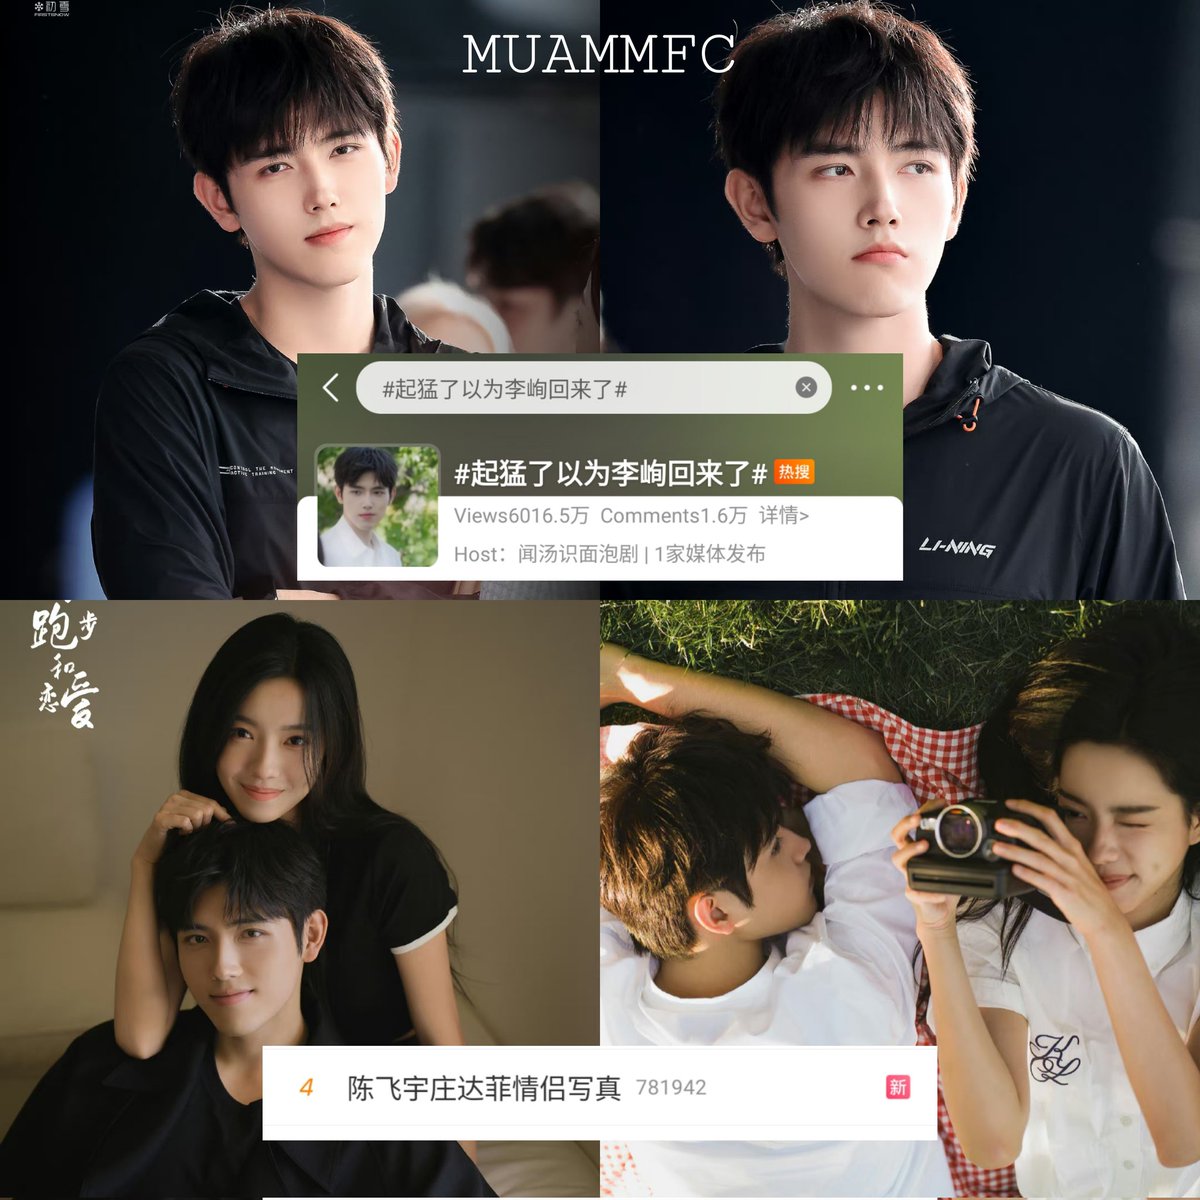 'Thought Li Xun came back and I got excited' and 'Chen Feiyu and Zhuang Dafei couple photos' are trending on entertainment hot search! This is such a good start for new drama. Everyone is falling for Feiyu's visual😘 #ချန်ဖေးယွီ #陈飞宇 #Arthurchen #진비우 #เฉินเฟยอวี่ #ChenFeiyu